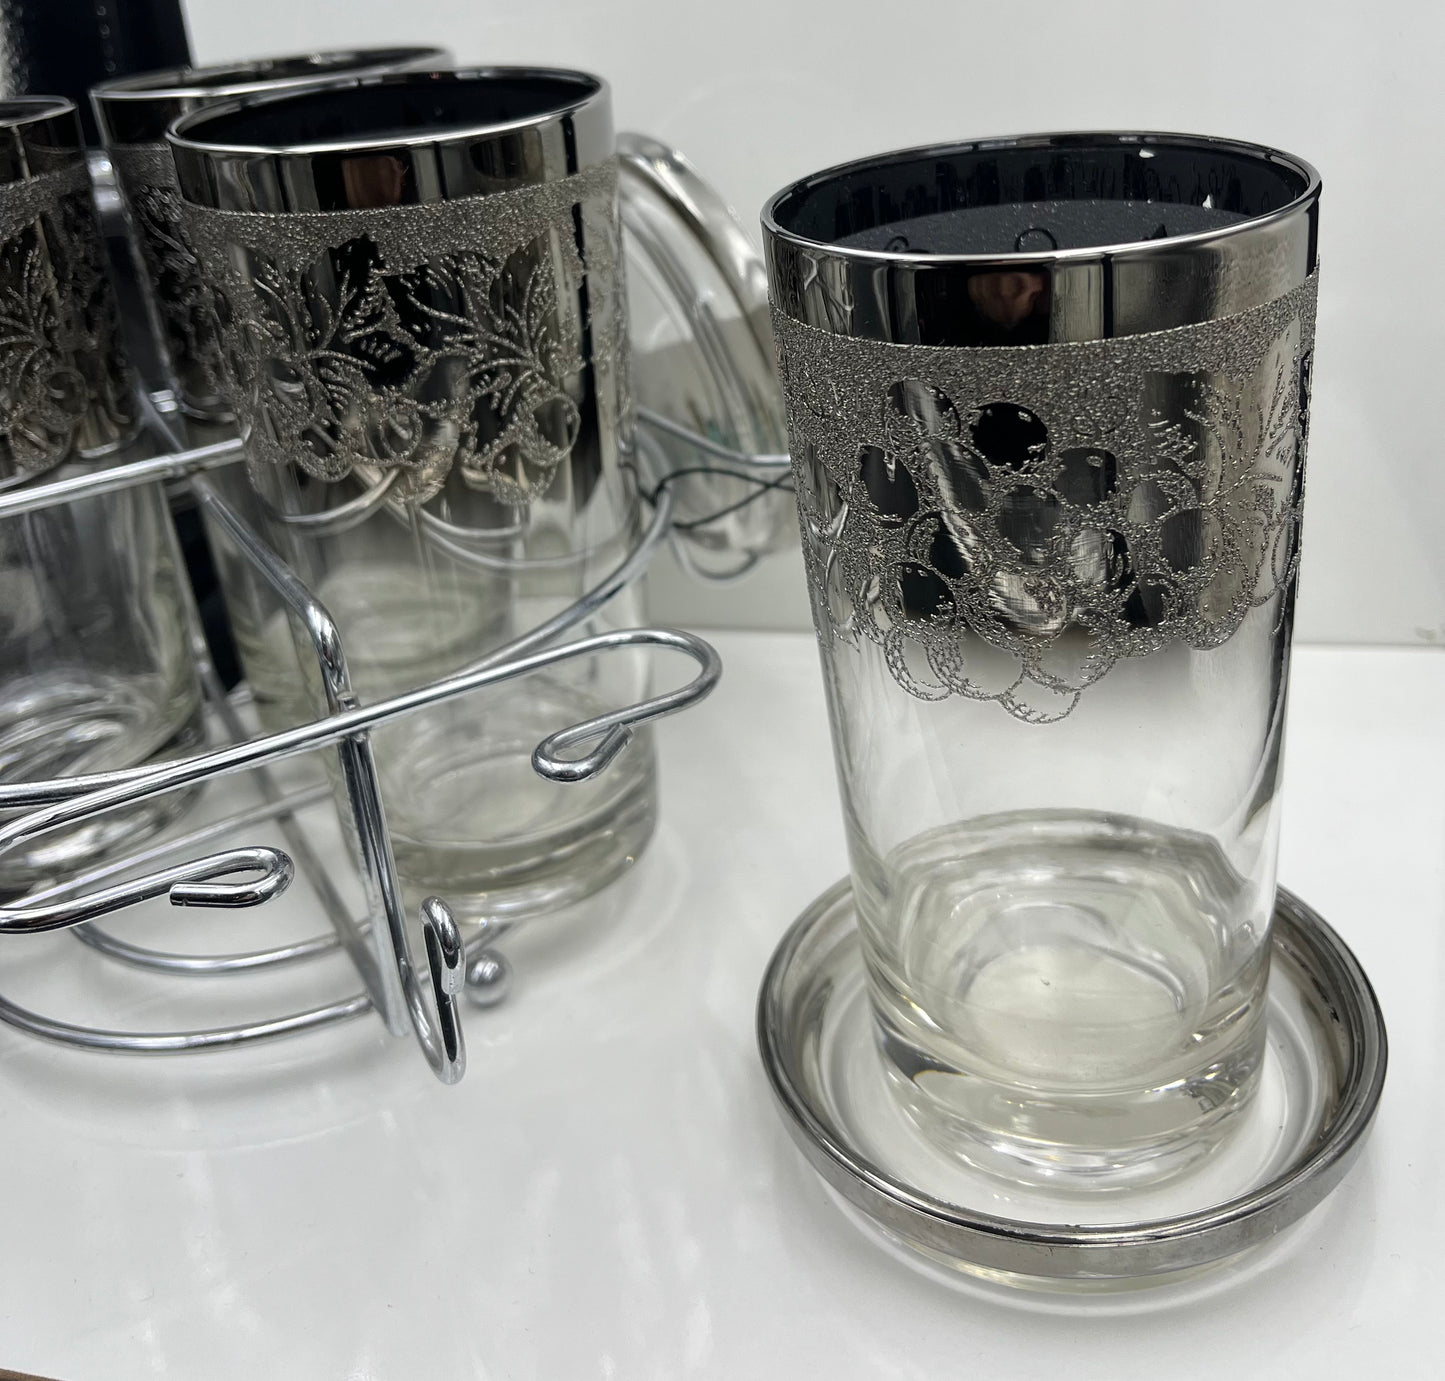 Vitreon Queens Luster set of 4 highball , 4 glass coasters, and metal caddy.